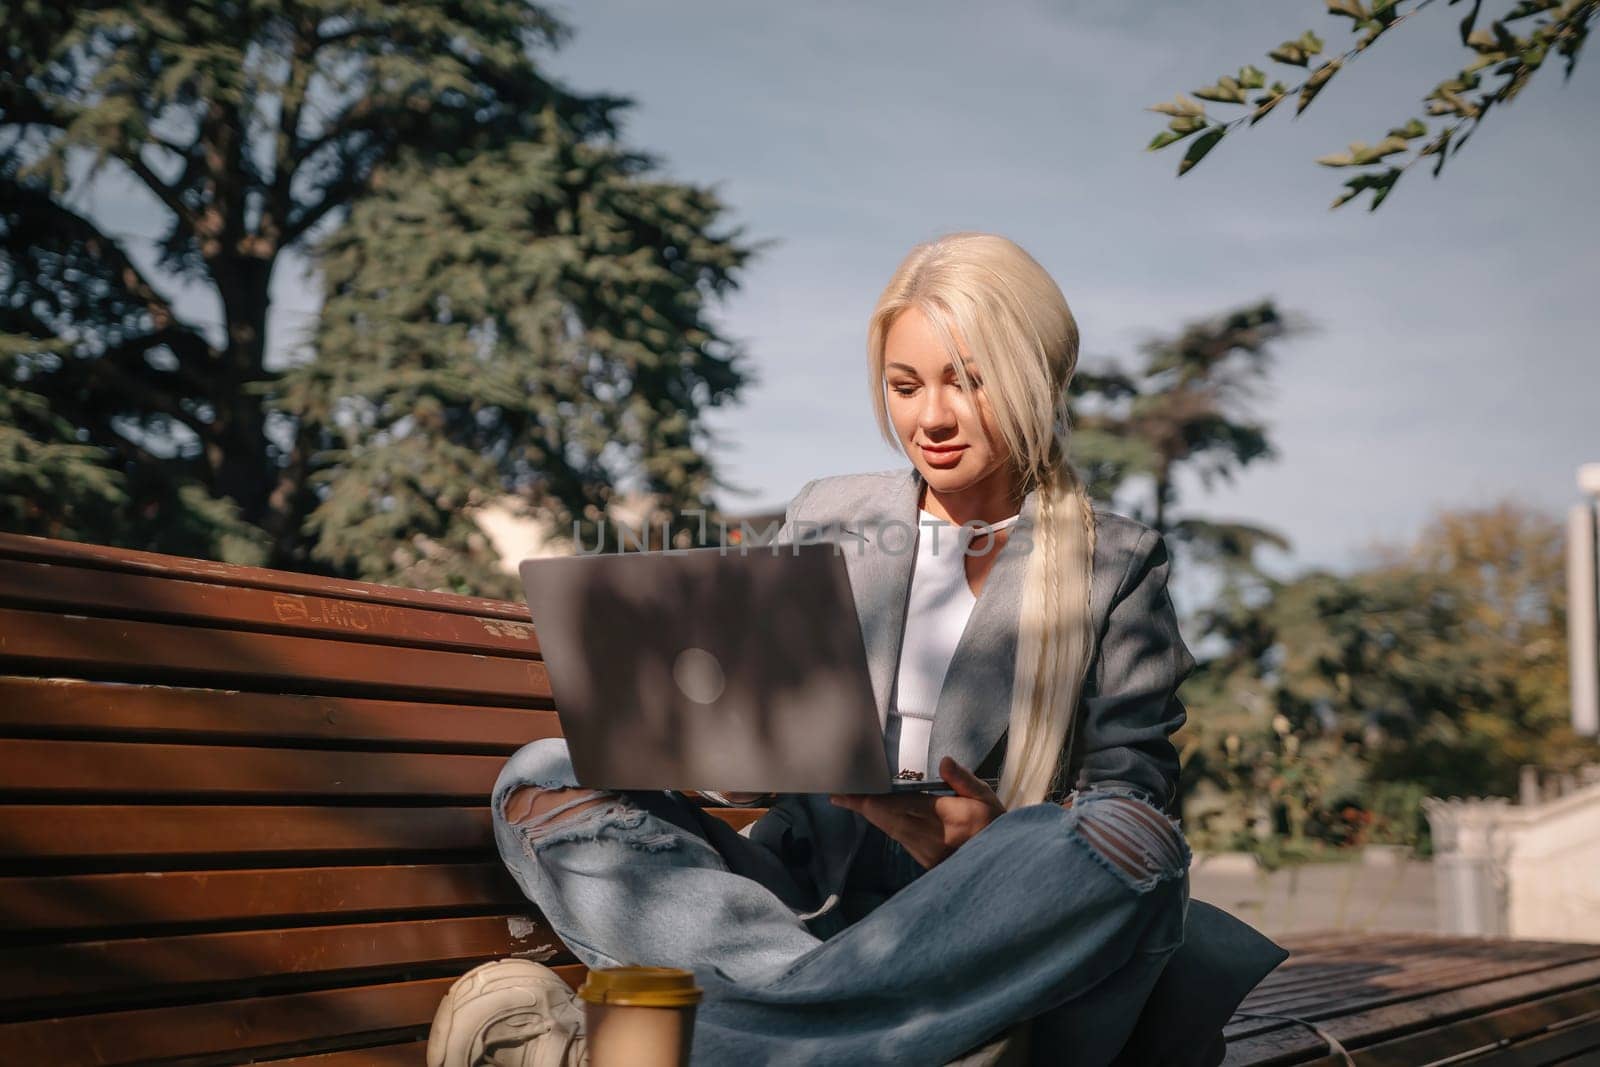 A blonde woman sits on a bench with a laptop in front of her. She is wearing a gray jacket and jeans. The scene suggests a casual and relaxed atmosphere, as the woman is using her laptop outdoors. by Matiunina